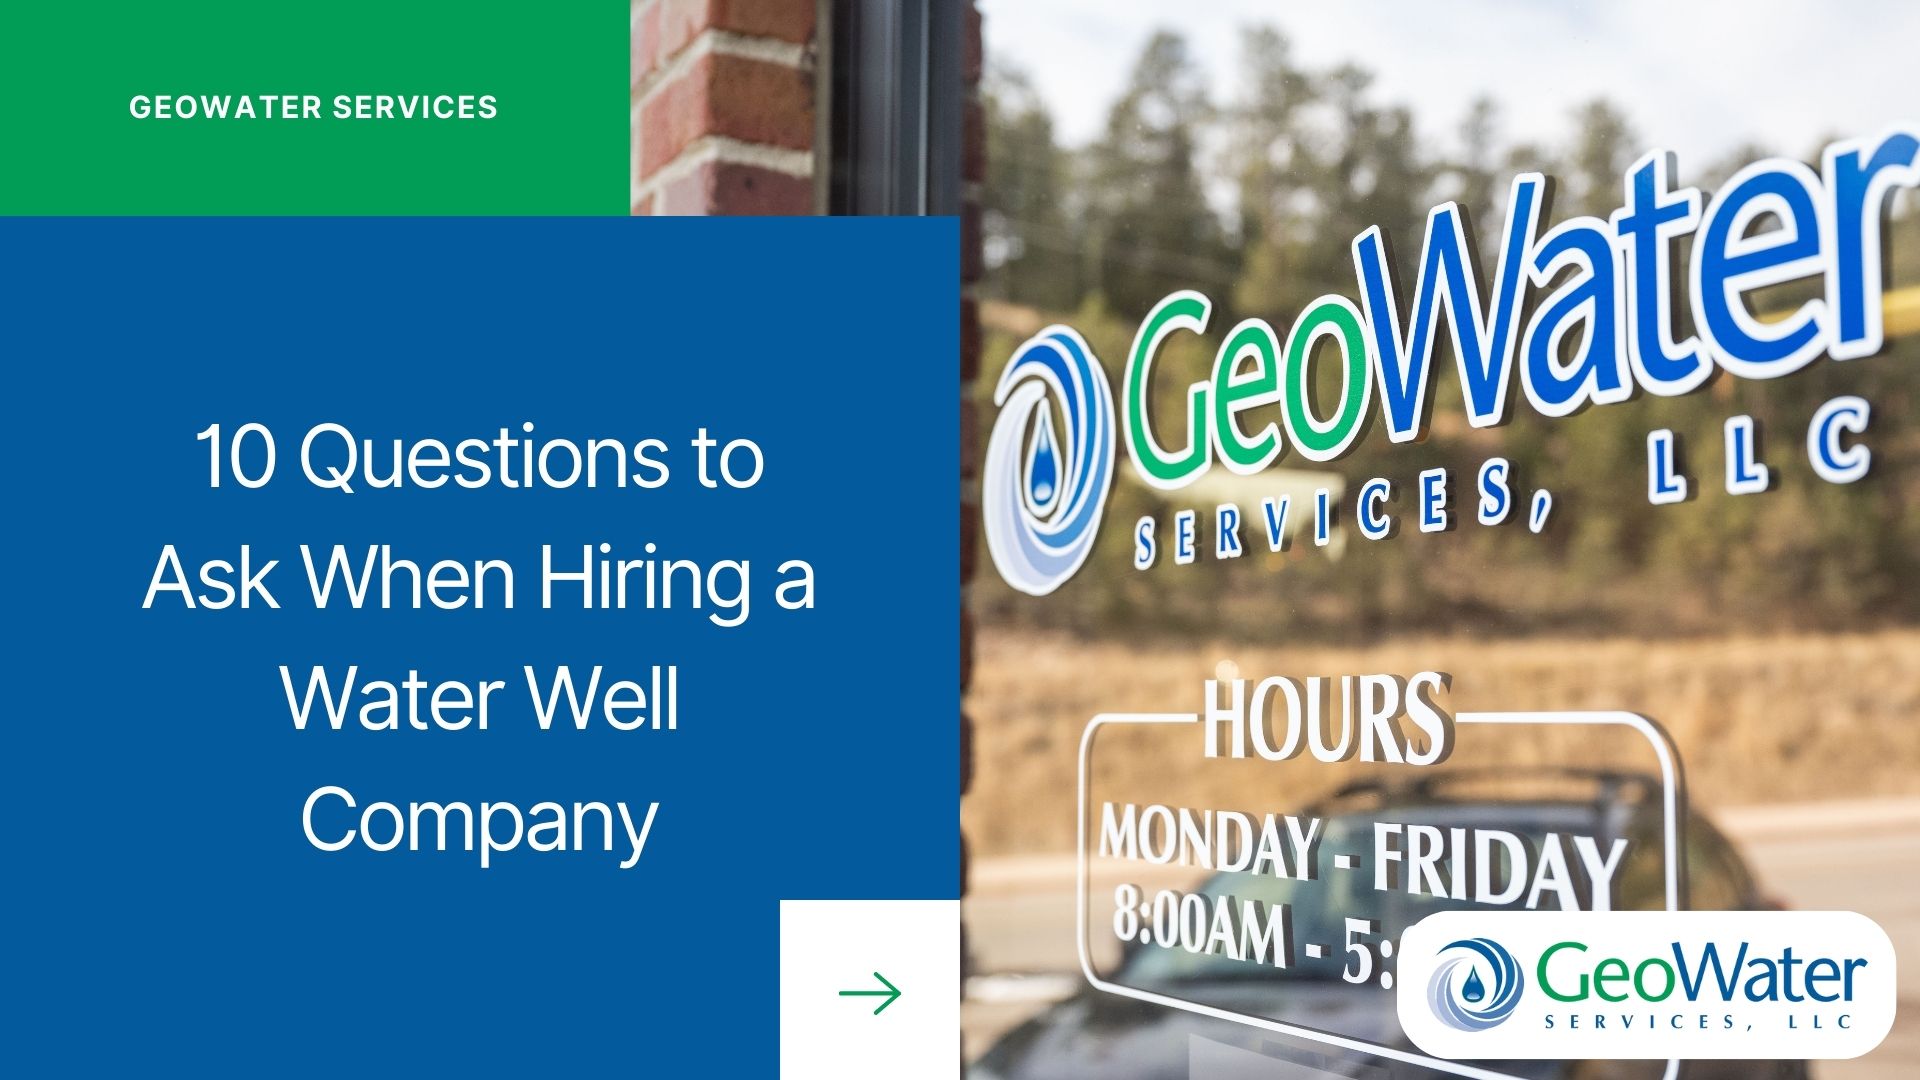 10 Questions to Ask When Hiring a Water Well Company